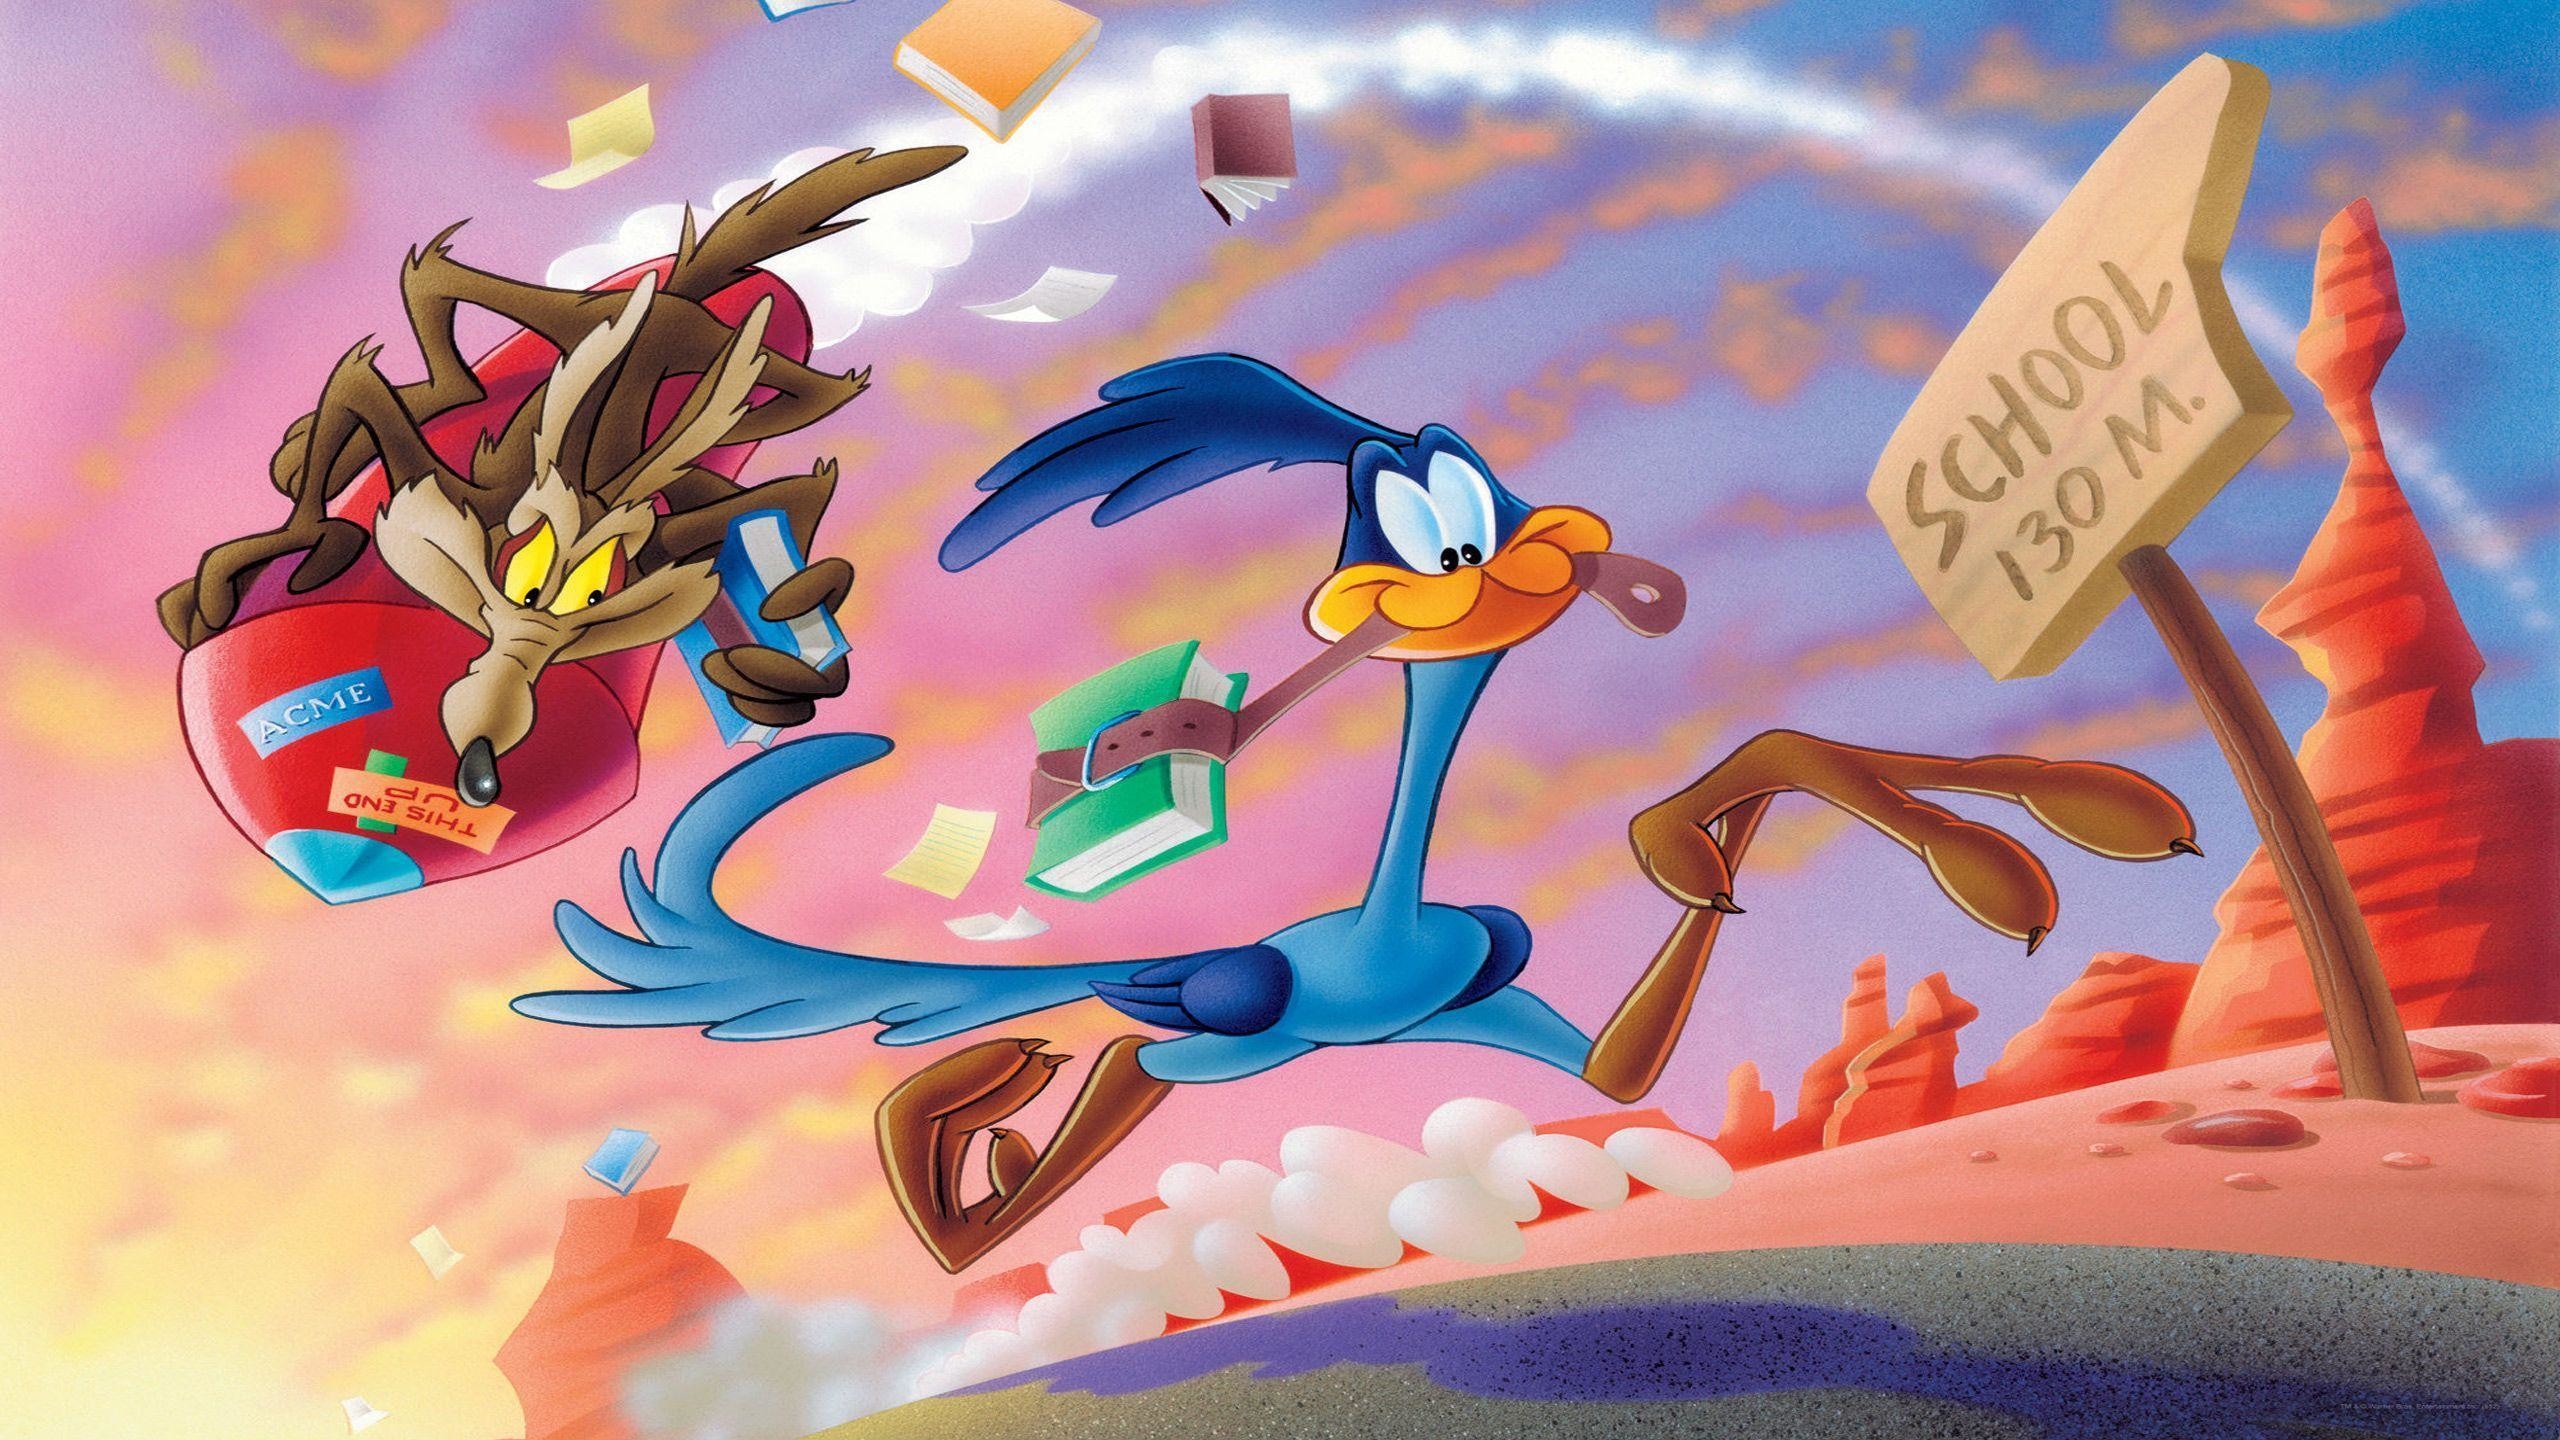 2560x1440 Looney Tunes Coyote And The Road Runner Wallpapers | Free Computer .